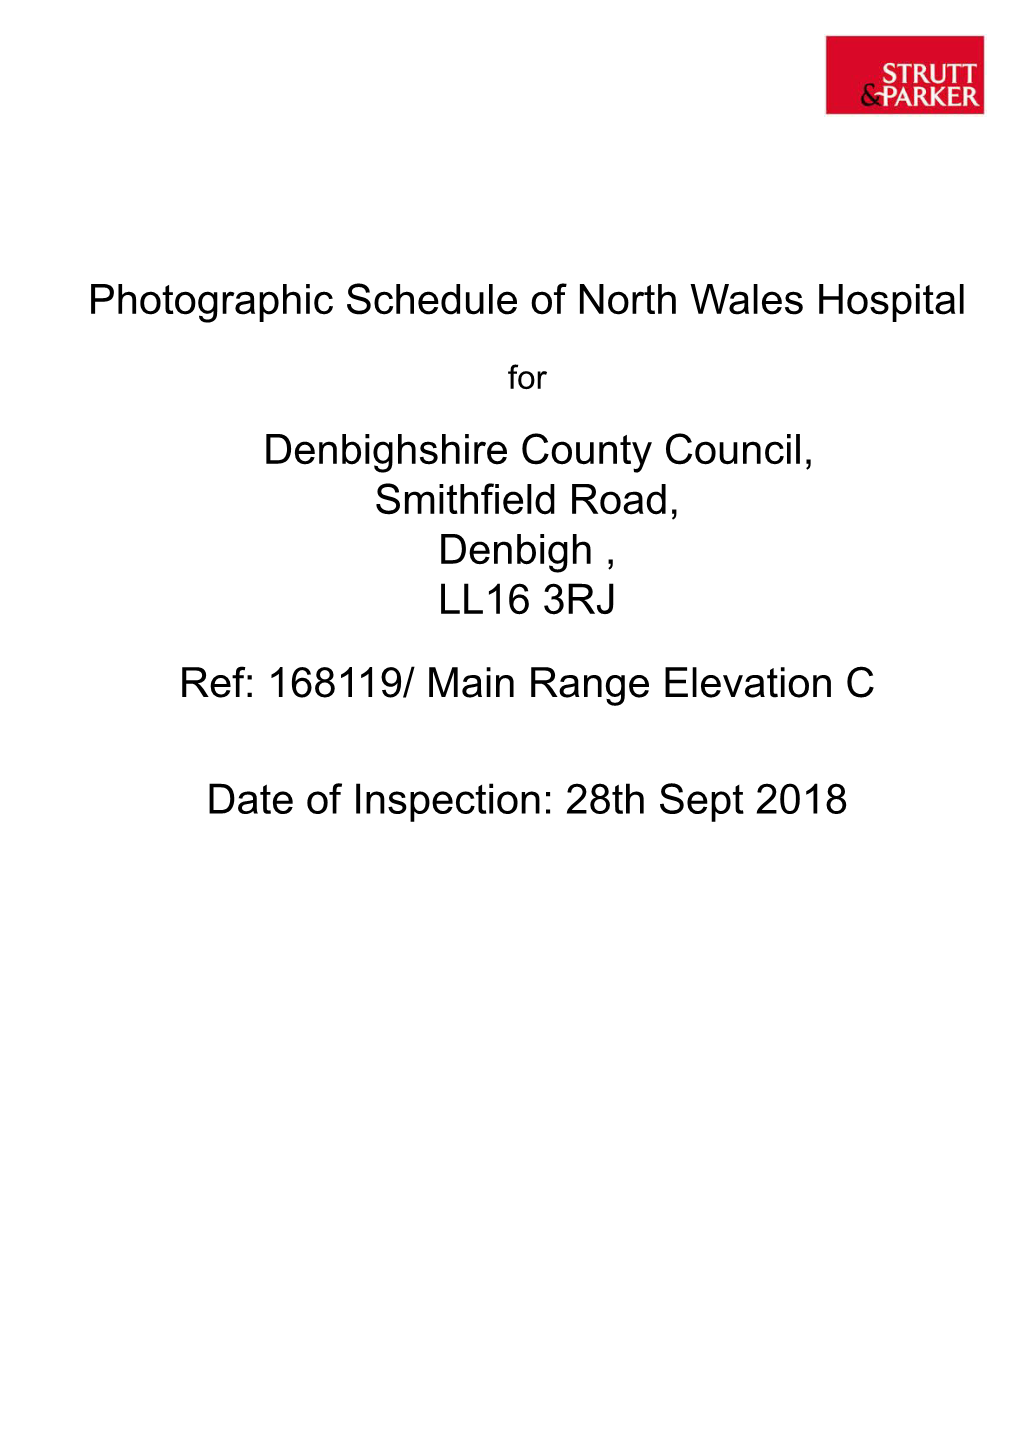 Photographic Schedule of North Wales Hospital Denbighshire County Council, Smithfield Road, Denbigh , LL16 3RJ